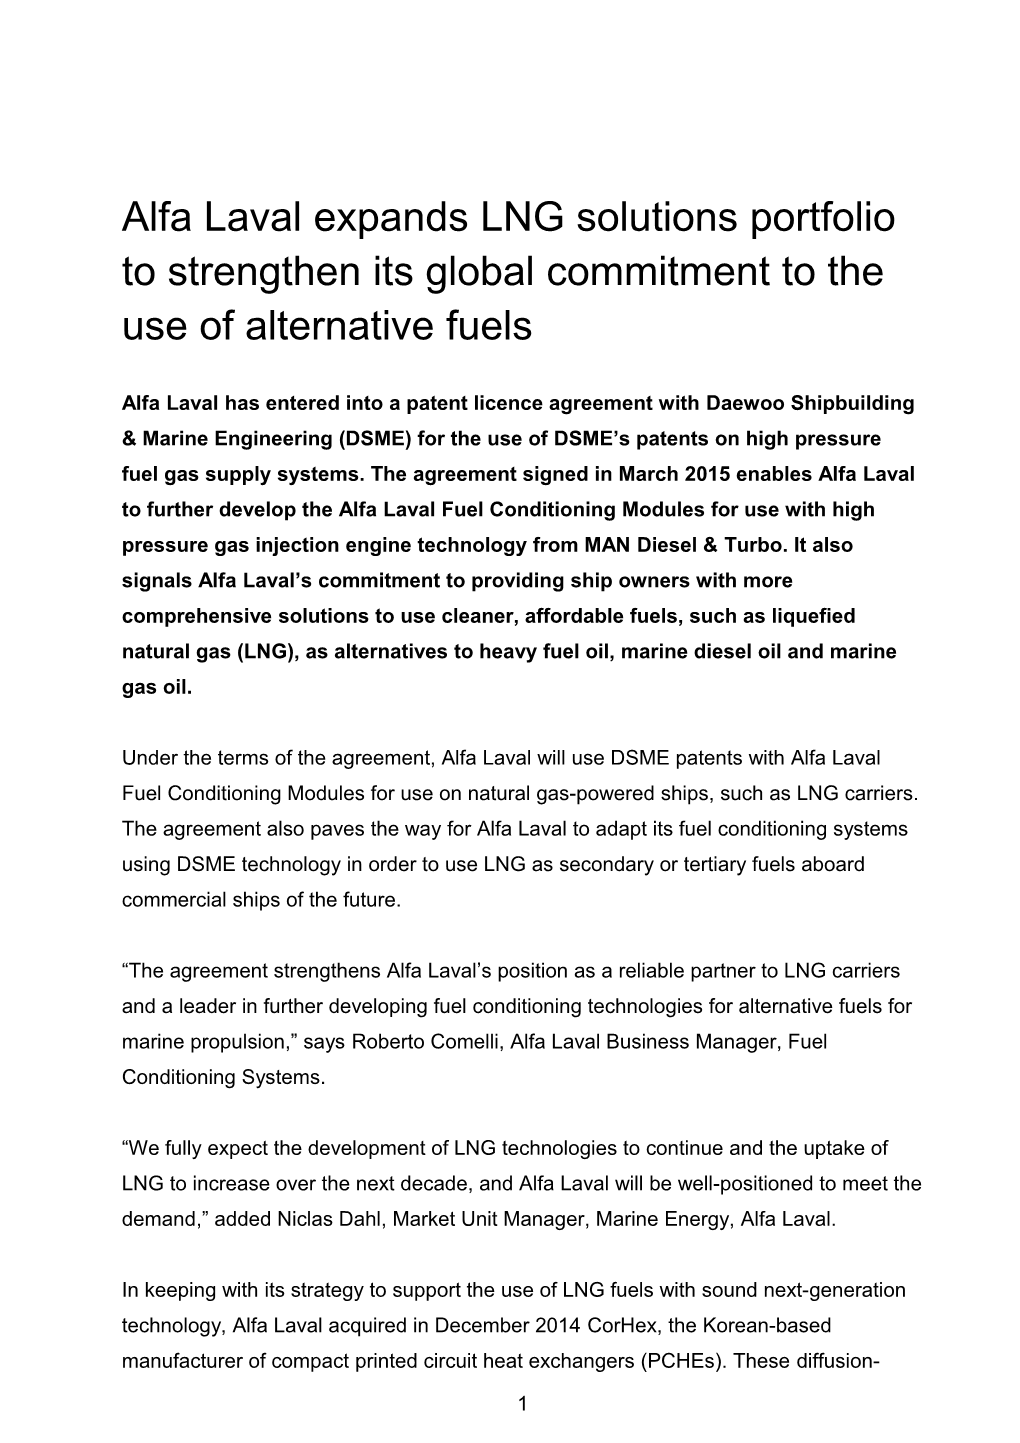 Alfa Laval Expands LNG Solutions Portfolio to Strengthen Its Global Commitment to the Use